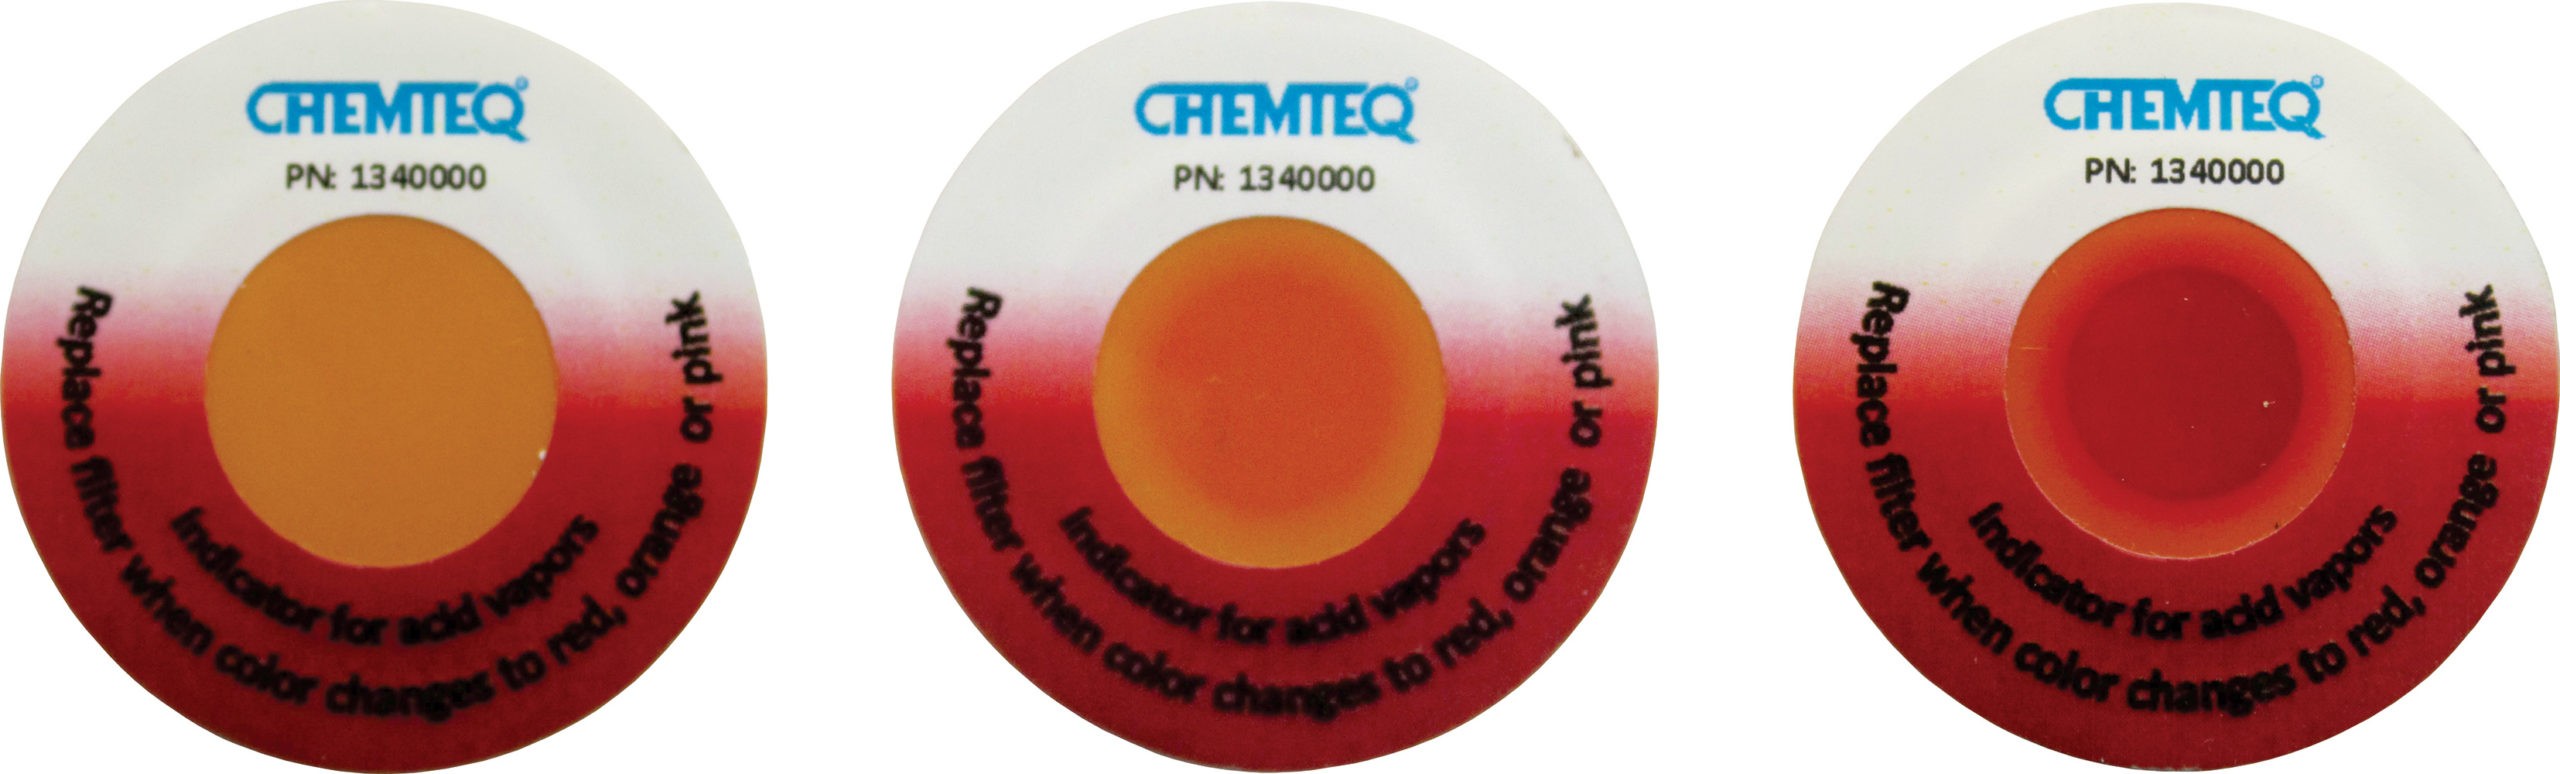 Acids Filter Change Indicator Sticker – BTIS for ductless hood and fume extractor filters. Reliable and cost effective.